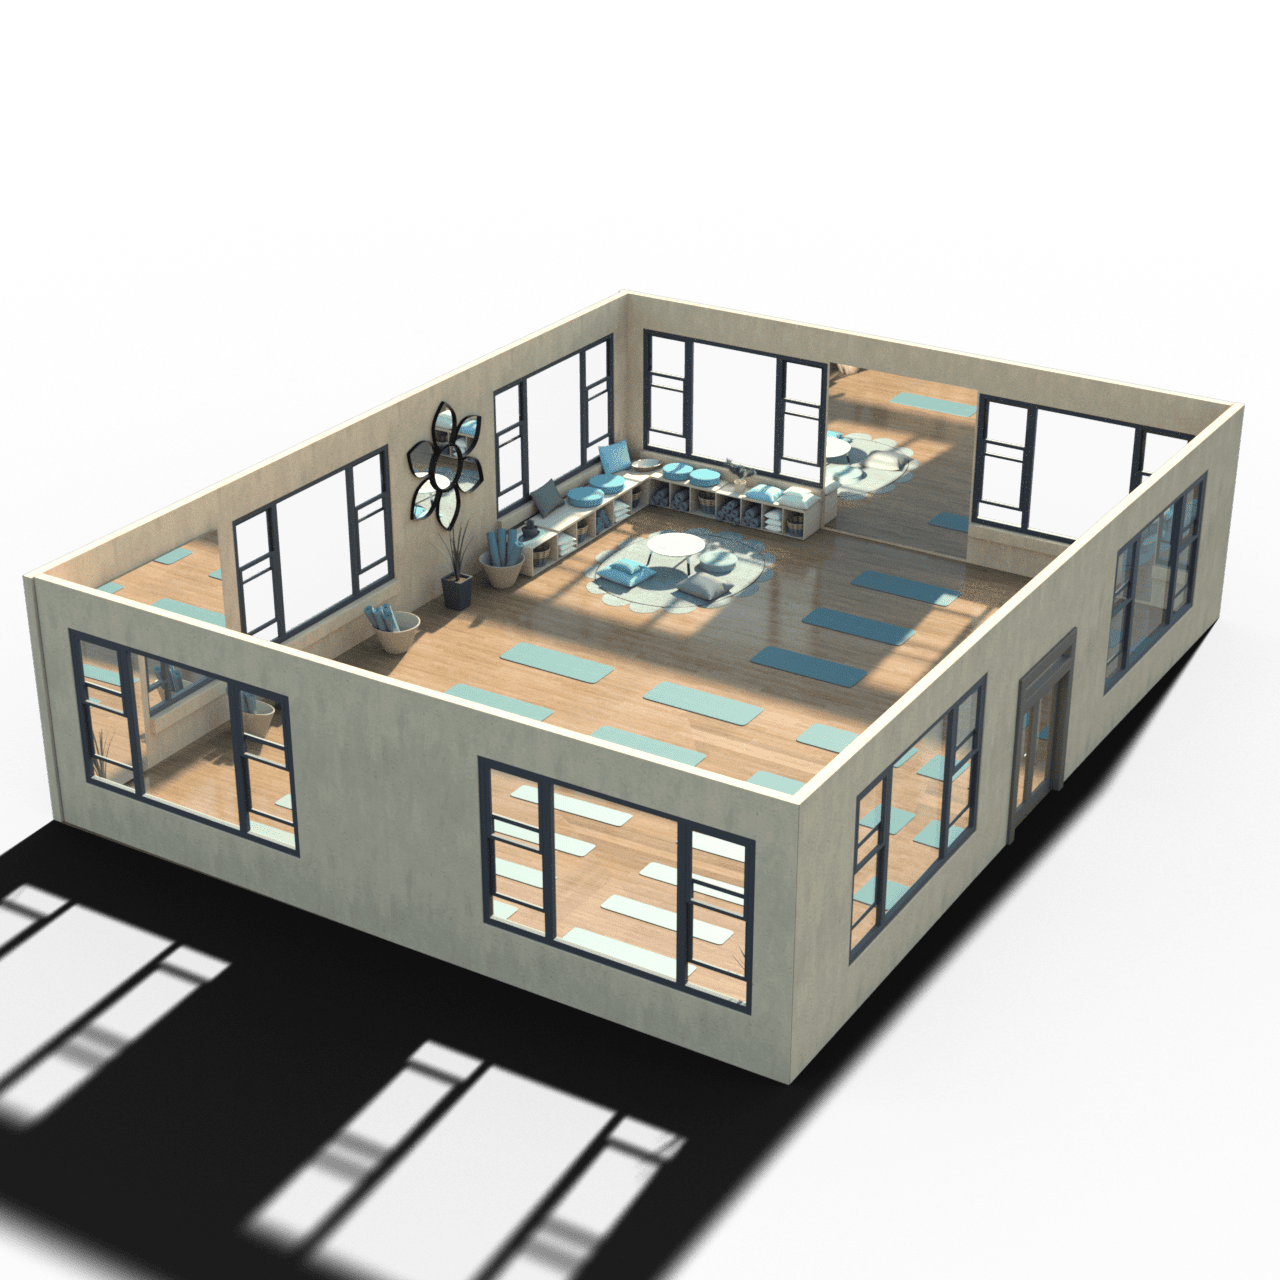 Zoomed out rendering of the yoga environment